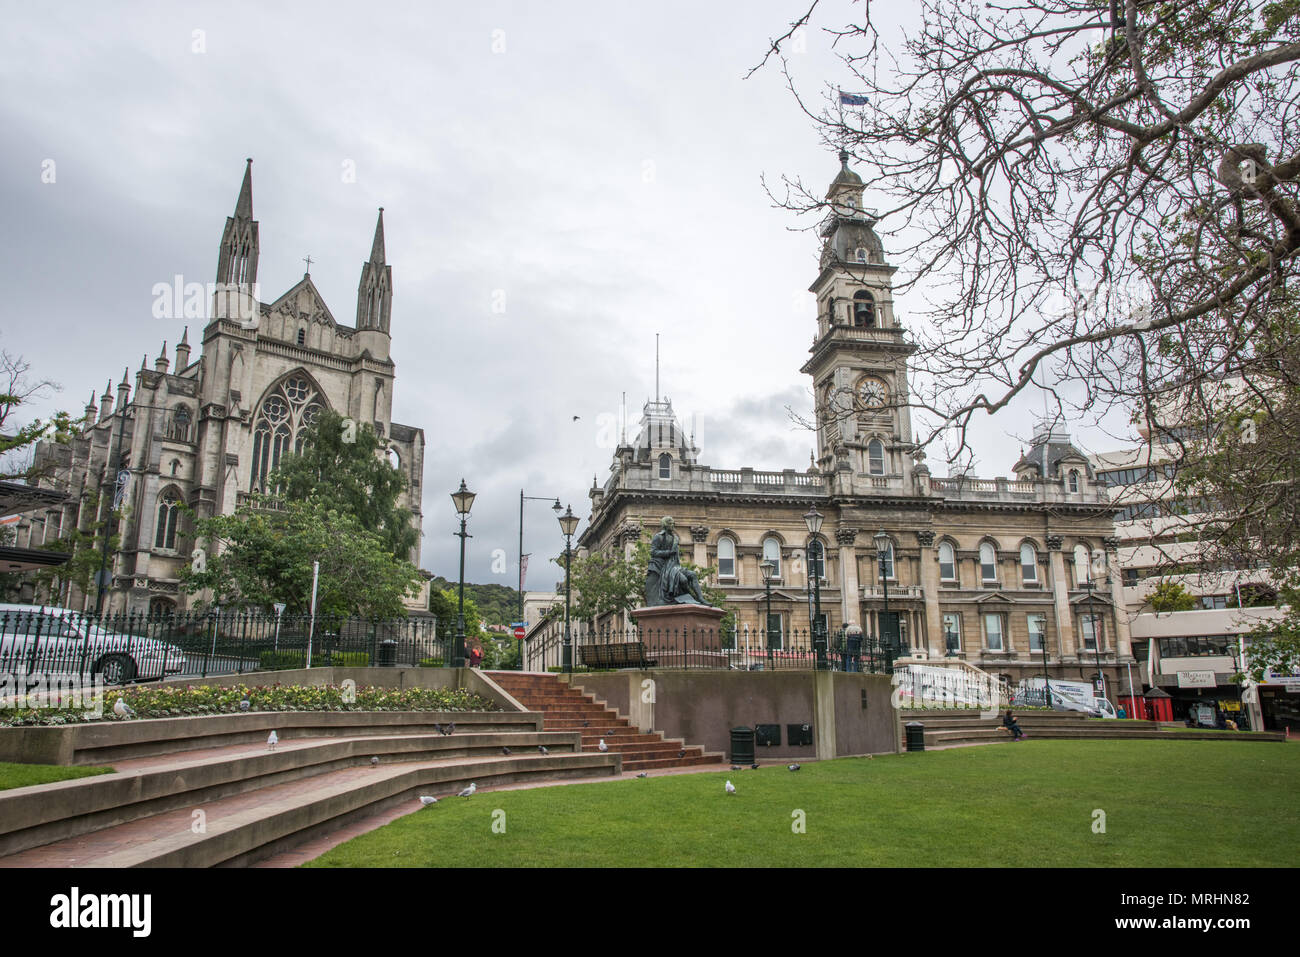 Dunedin, Otago, New Zealand-December 12,2016: The Octagon with Town Hall, Cathedral and Robert Burns statue in Dunedin, New Zealand Stock Photo